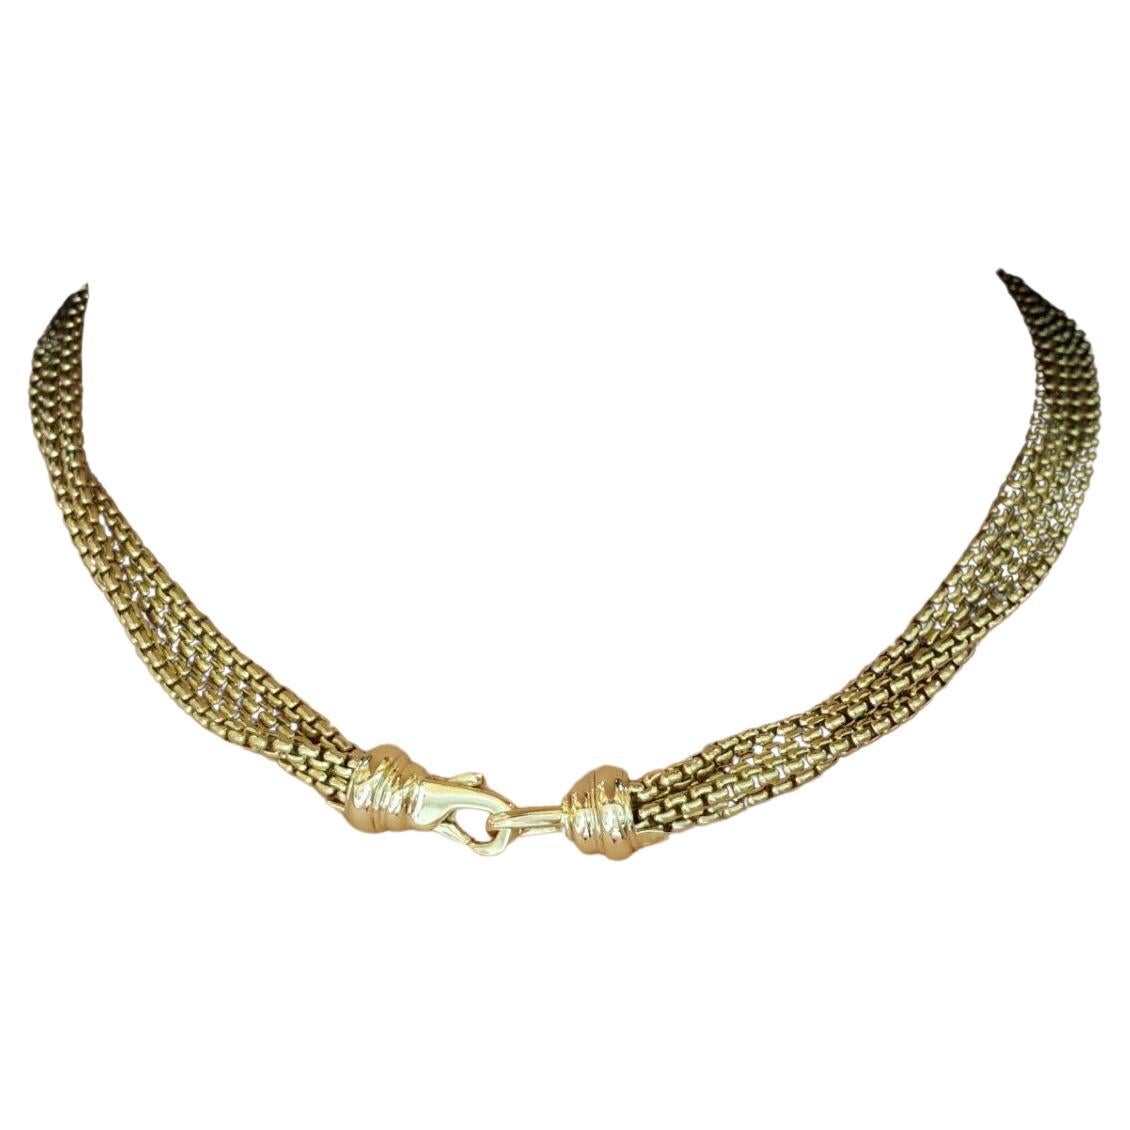  David Yurman 18k Yellow Gold Multi Cable Chain Necklace In Excellent Condition For Sale In Rome, IT